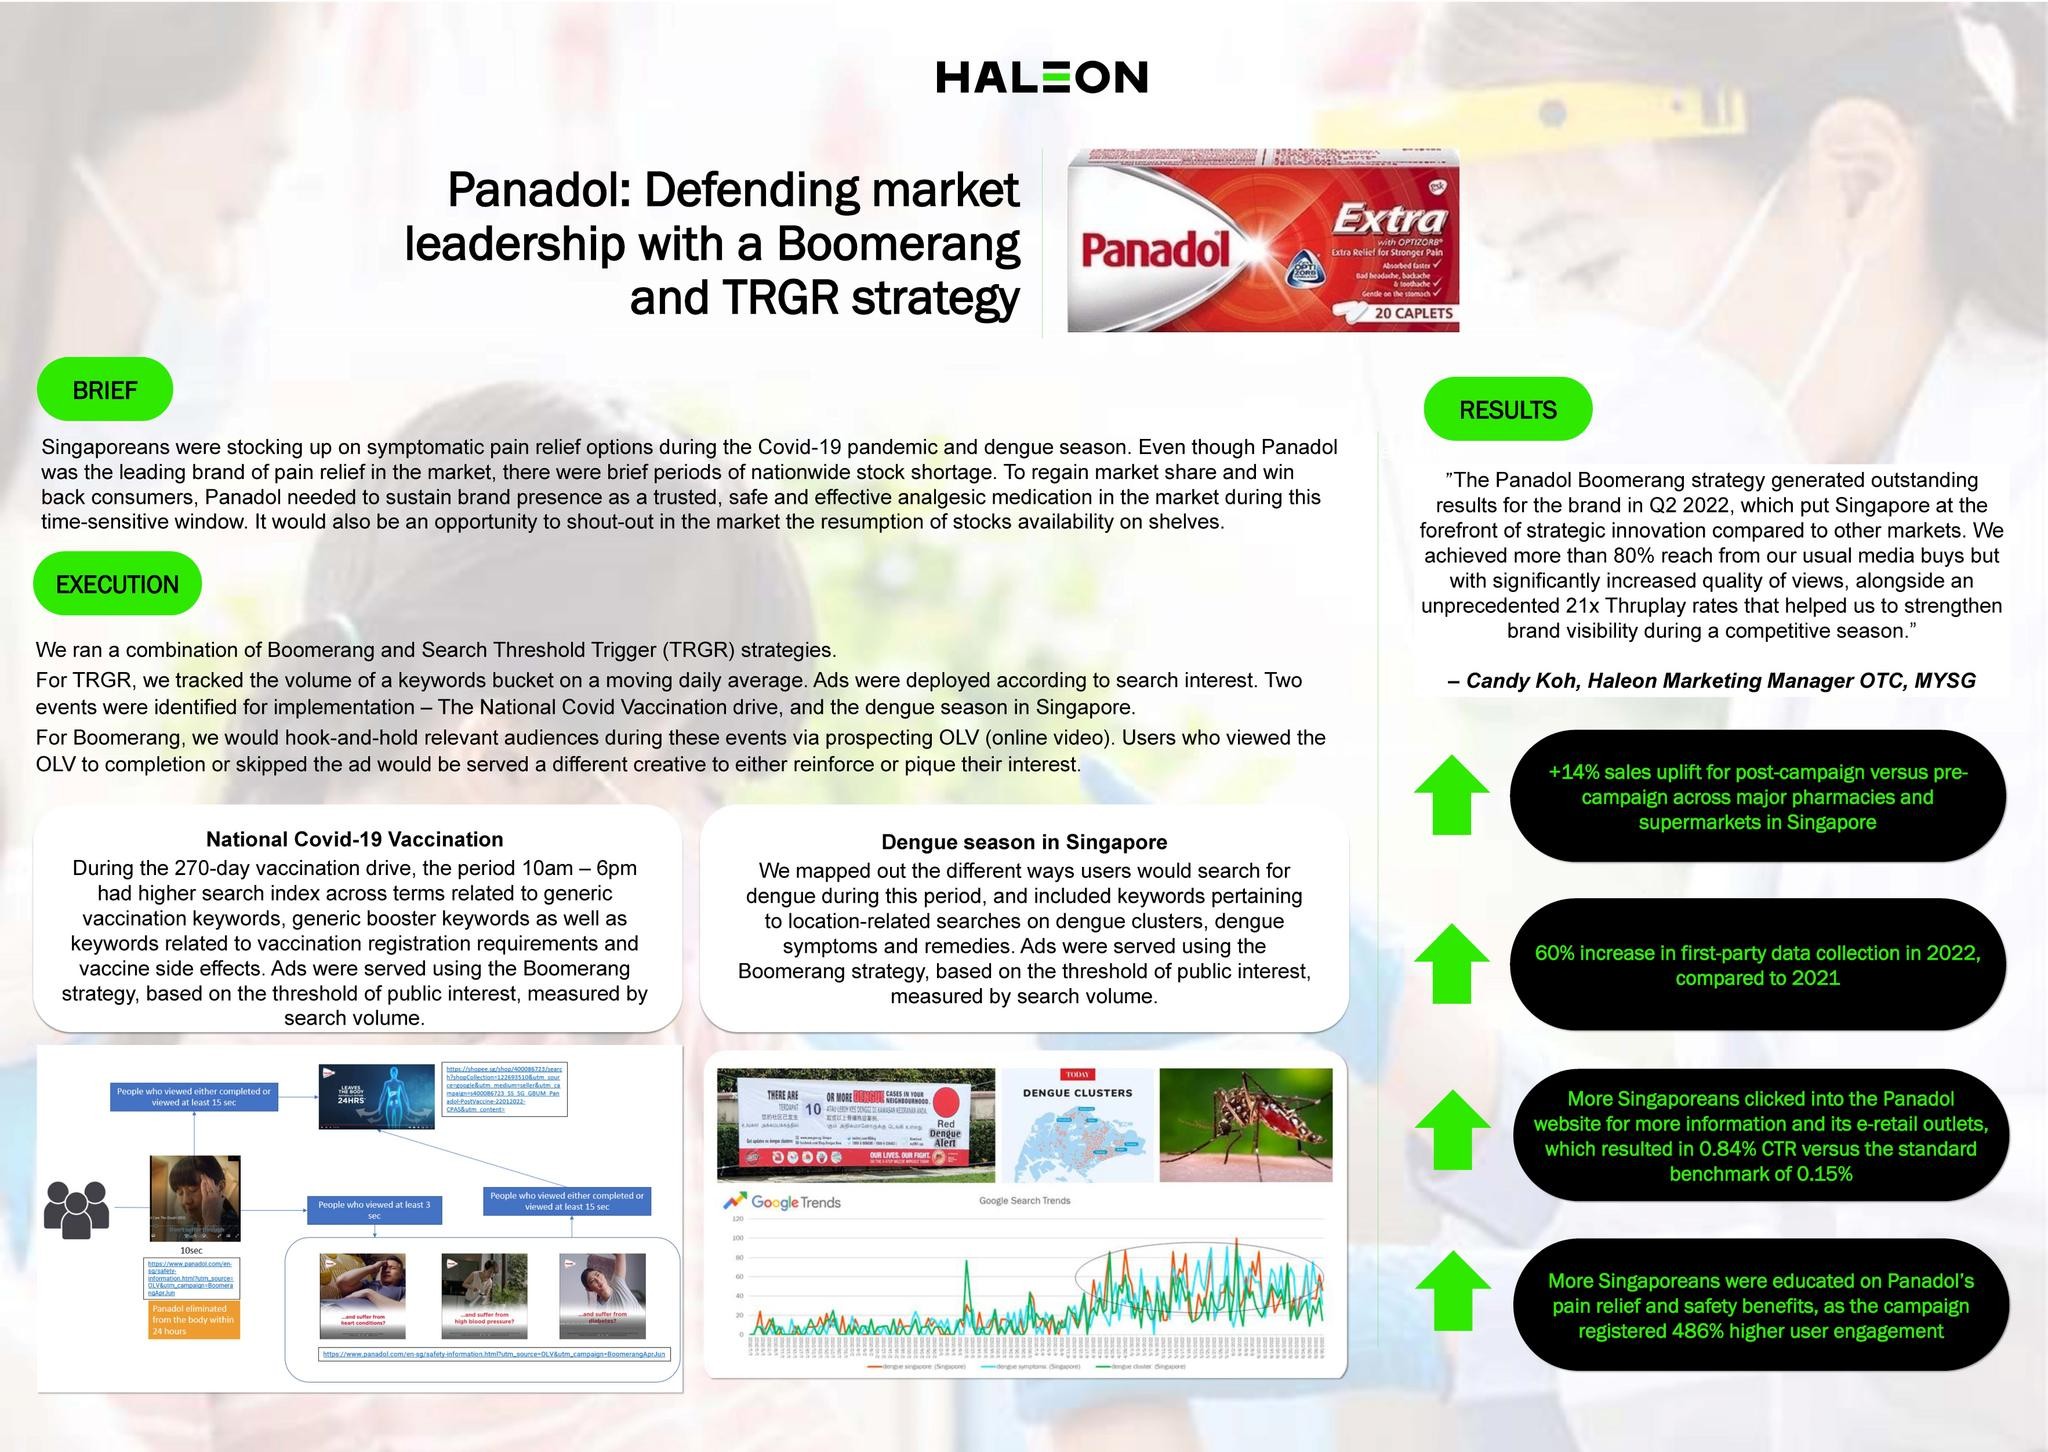 Panadol: Defending market leadership with a Boomerang and TRGR strategy